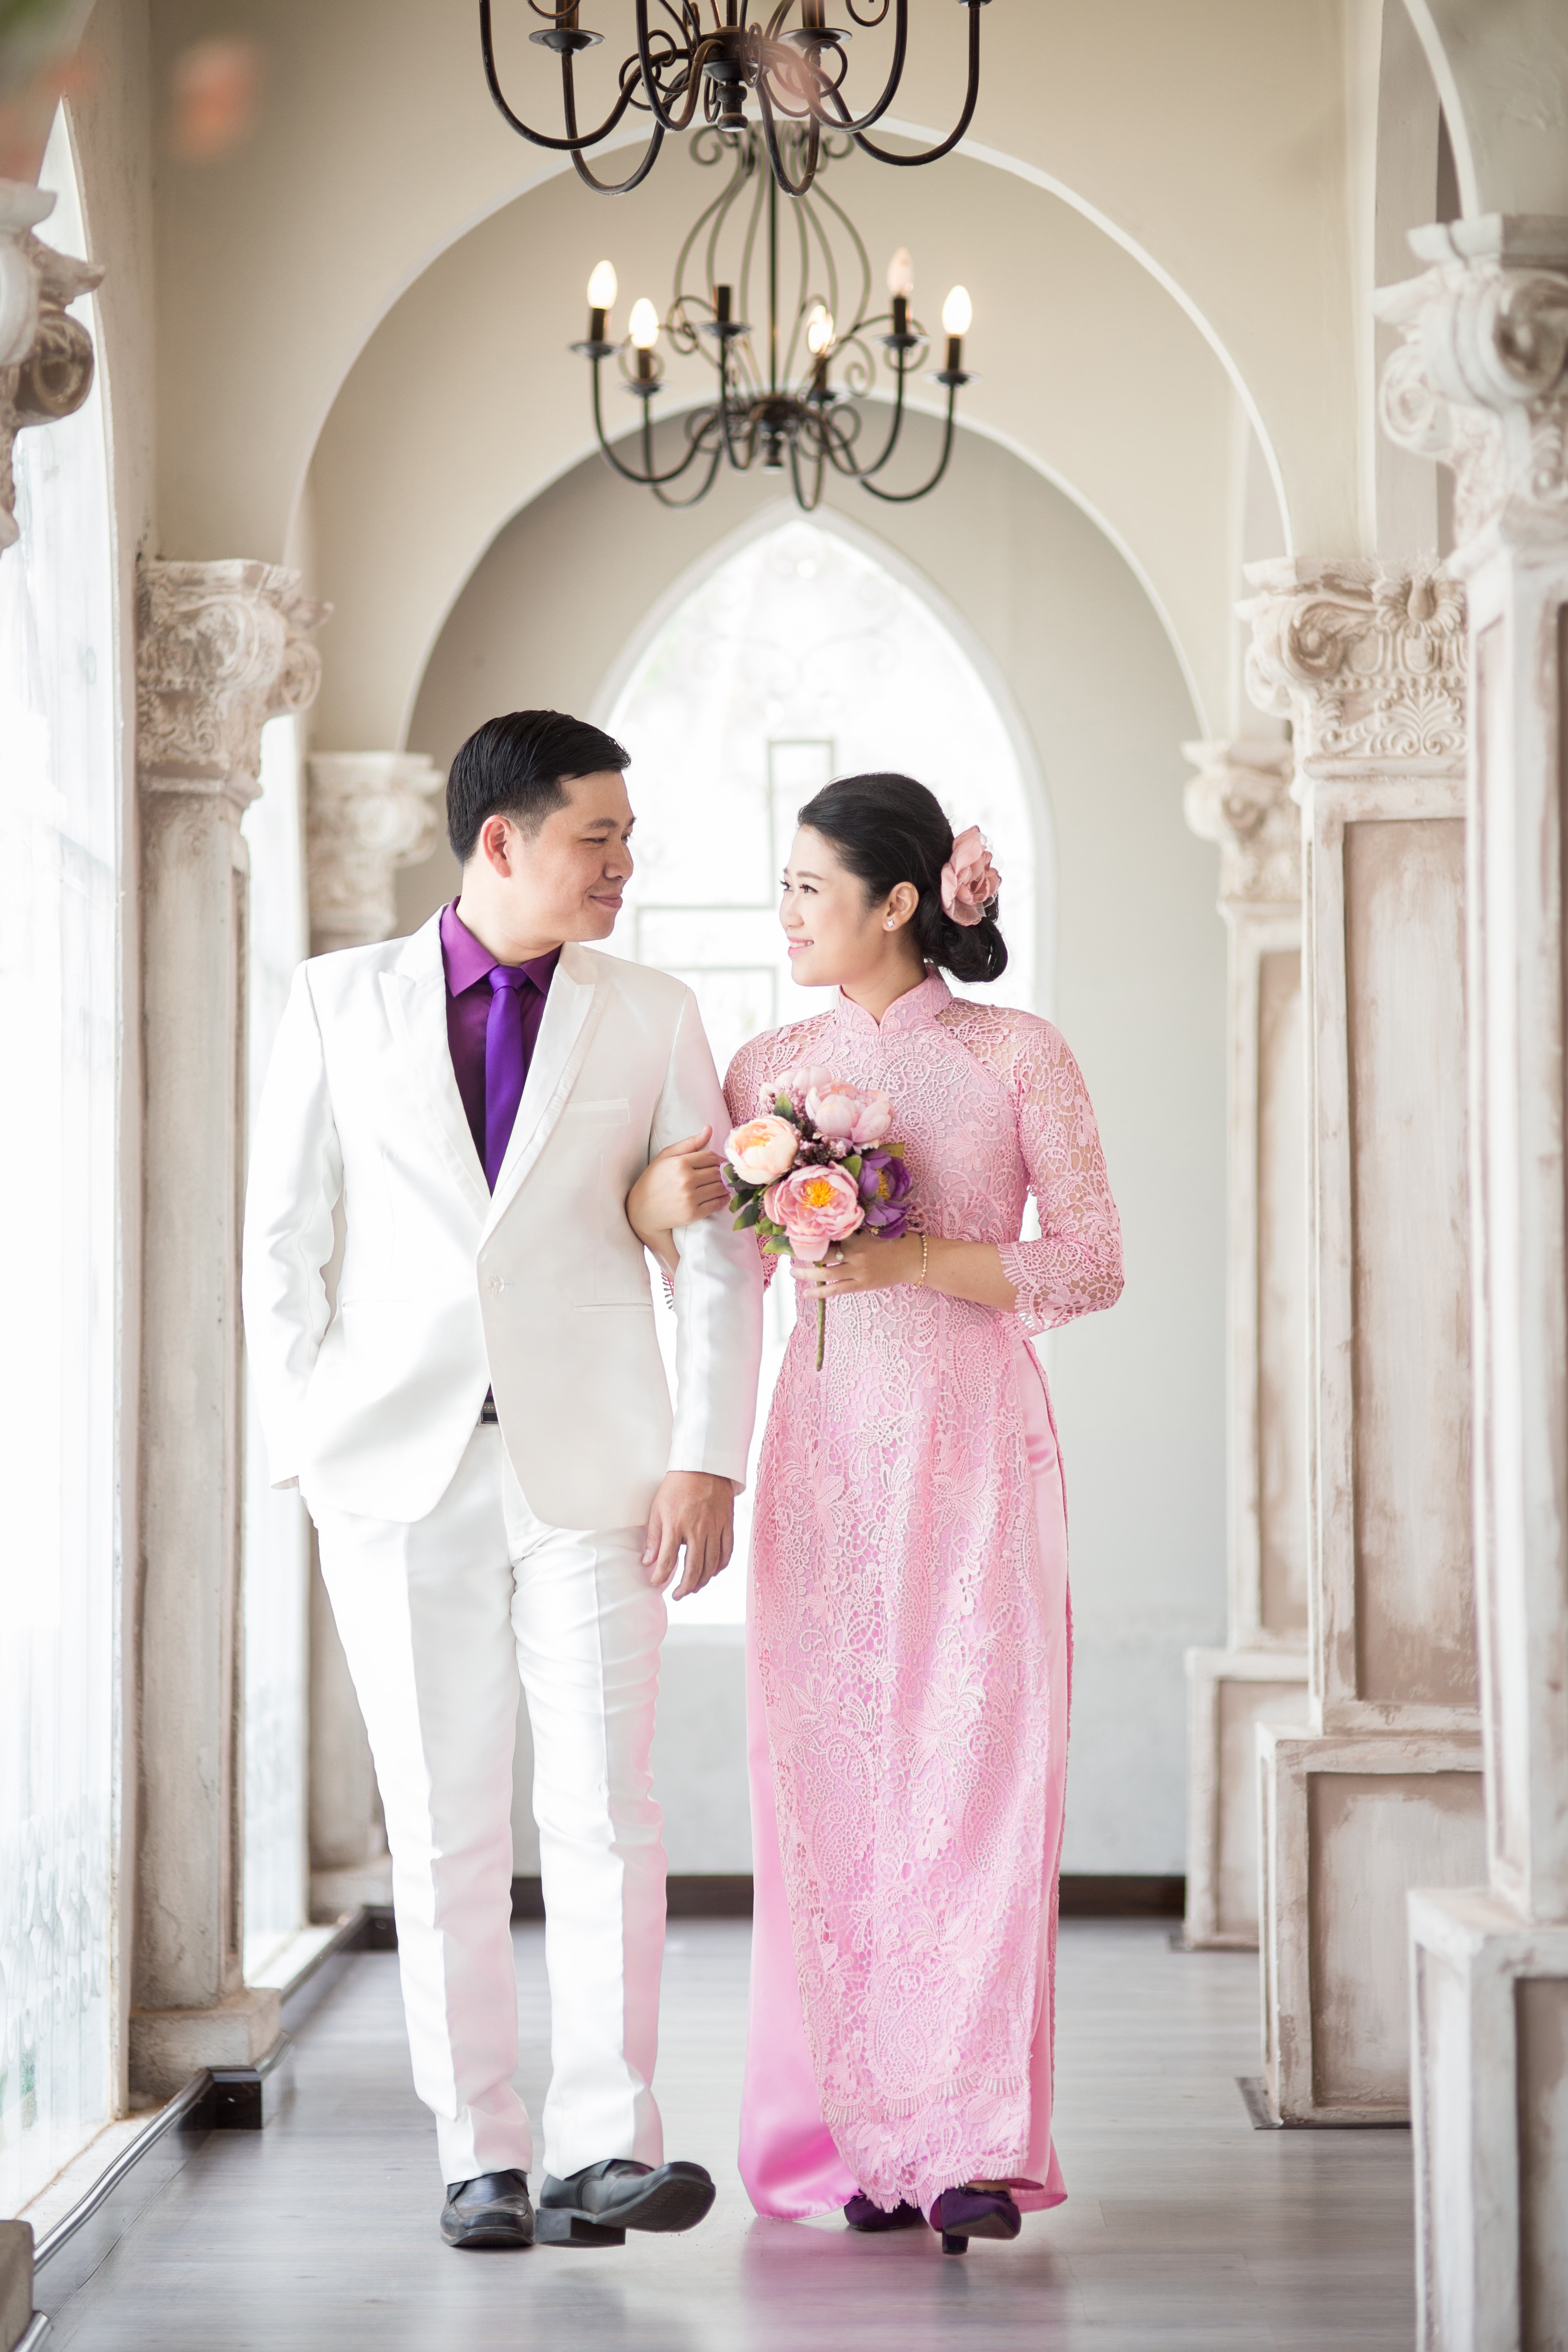 3 Amazing Wedding Cultures: What to Wear and How They Differ 5